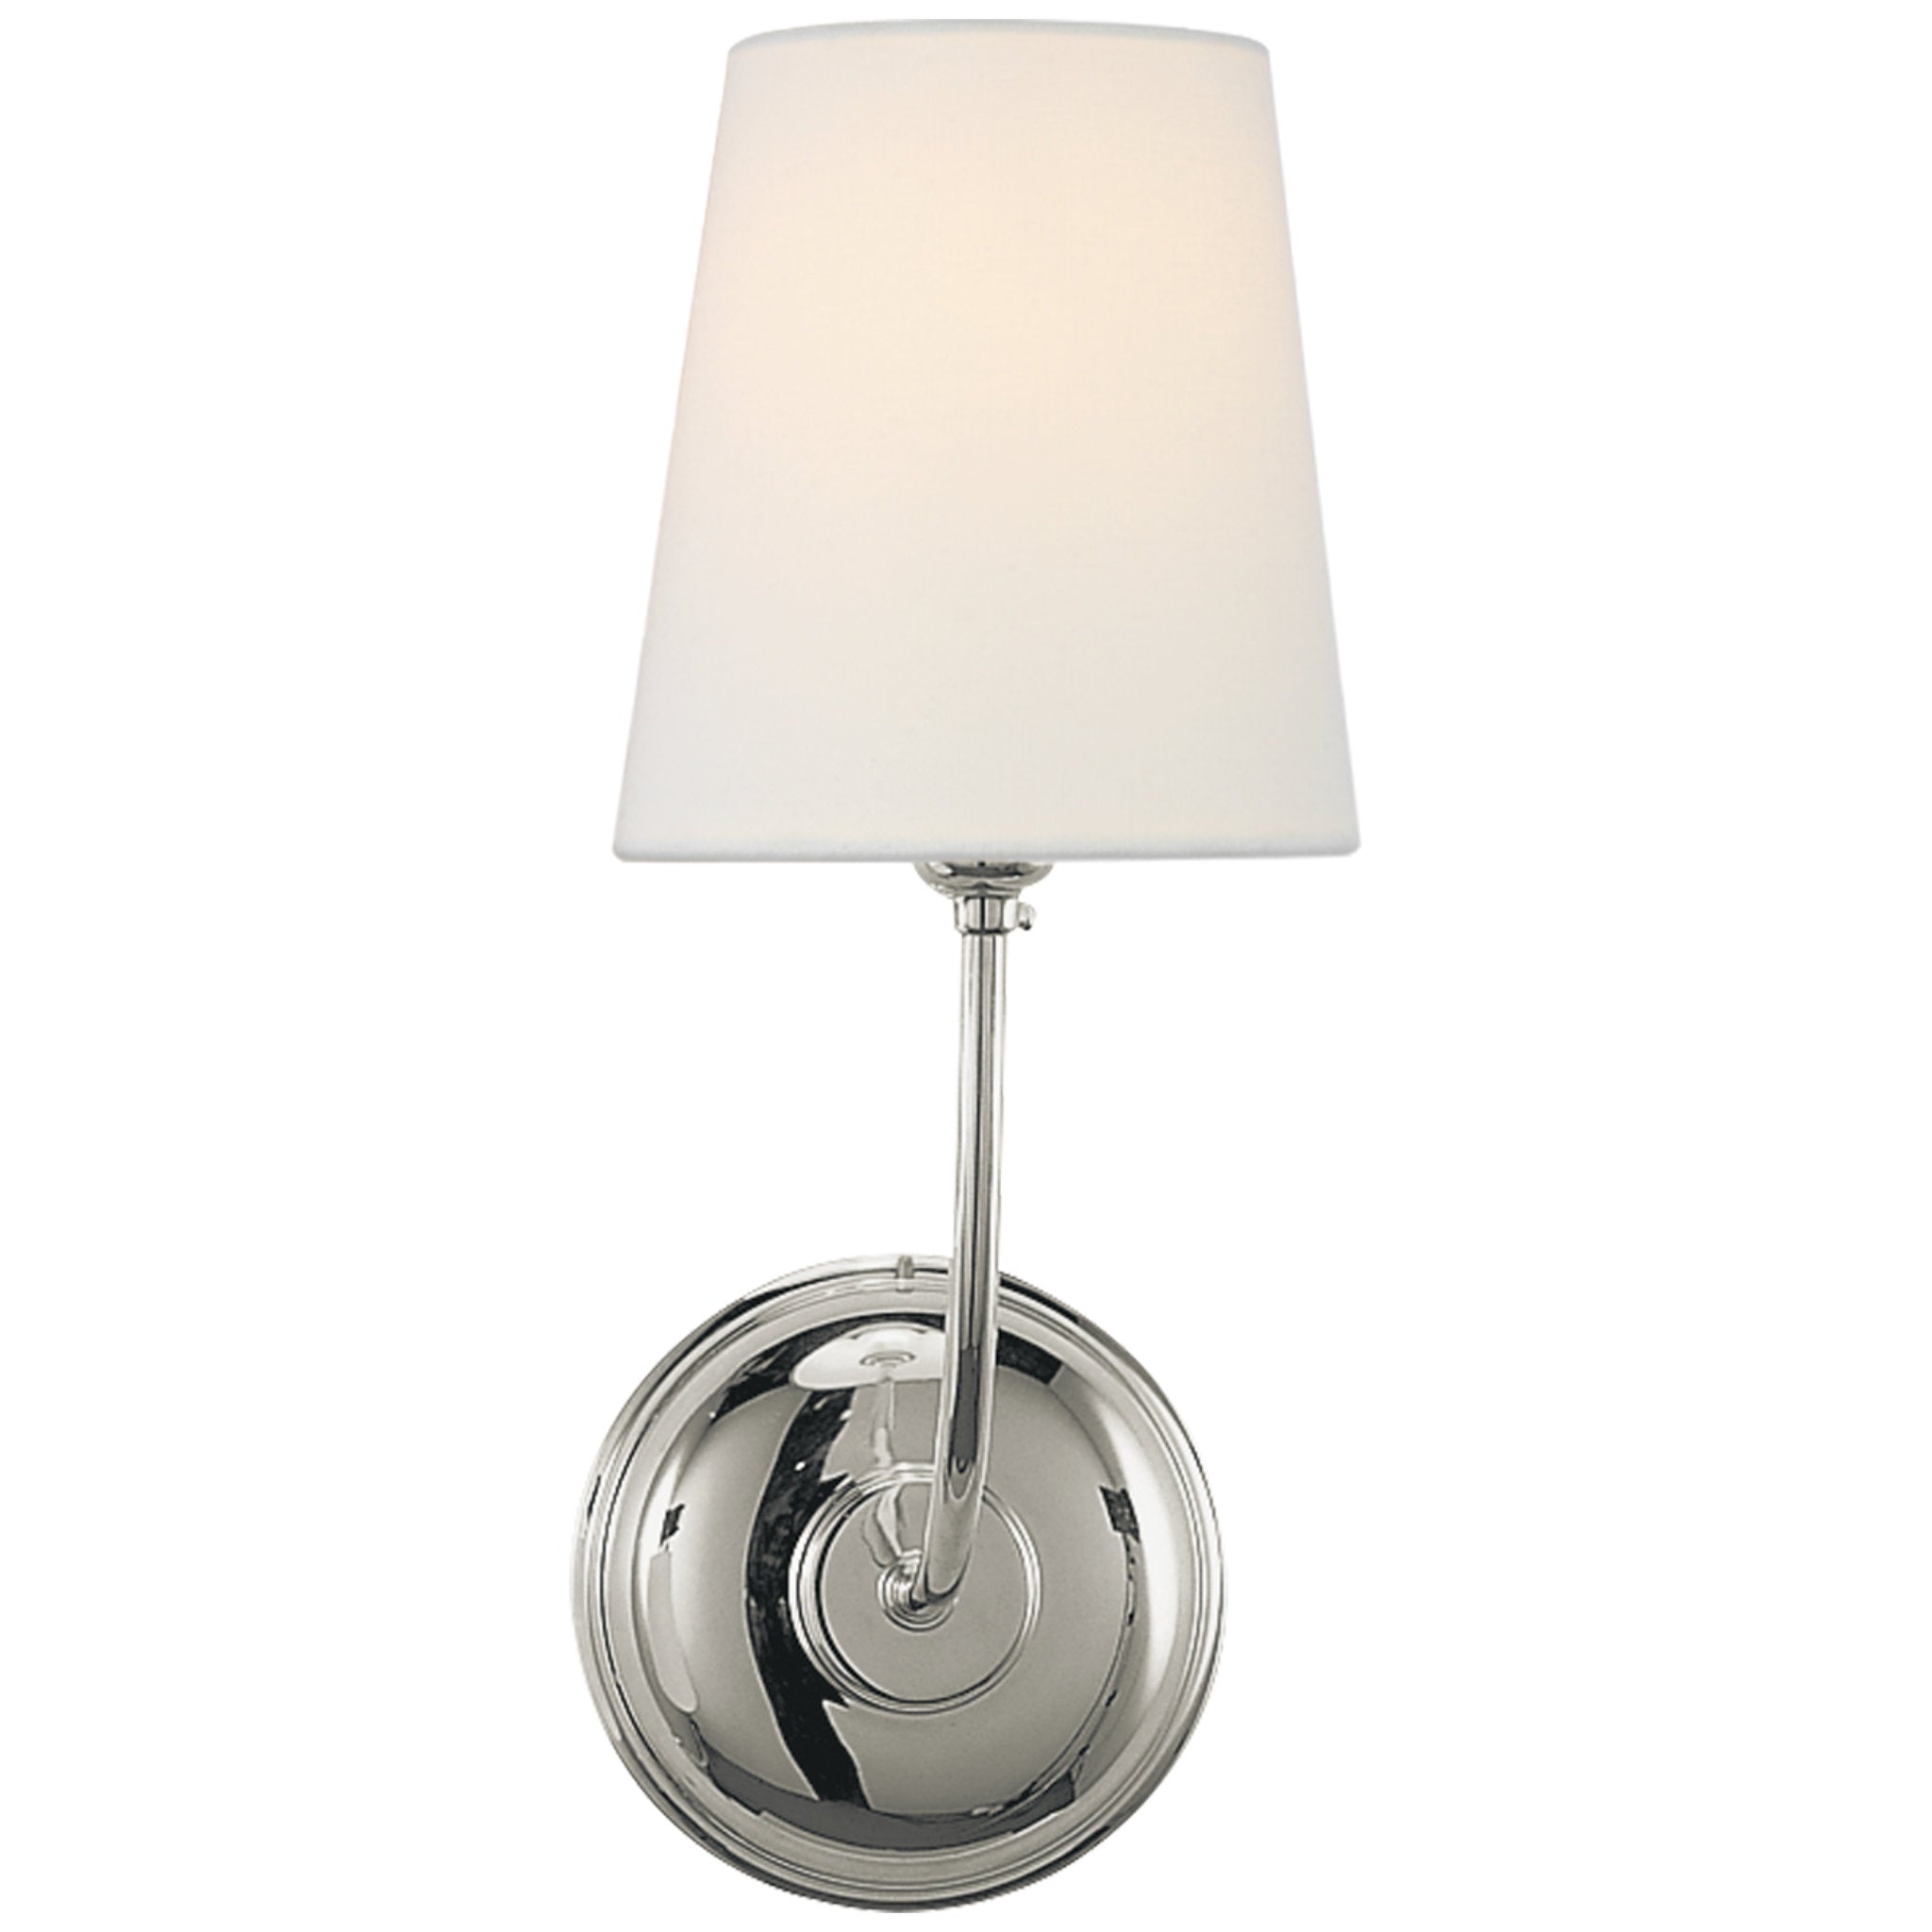 Thomas O'Brien Vendome Single Sconce in Polished Nickel with Linen Shade